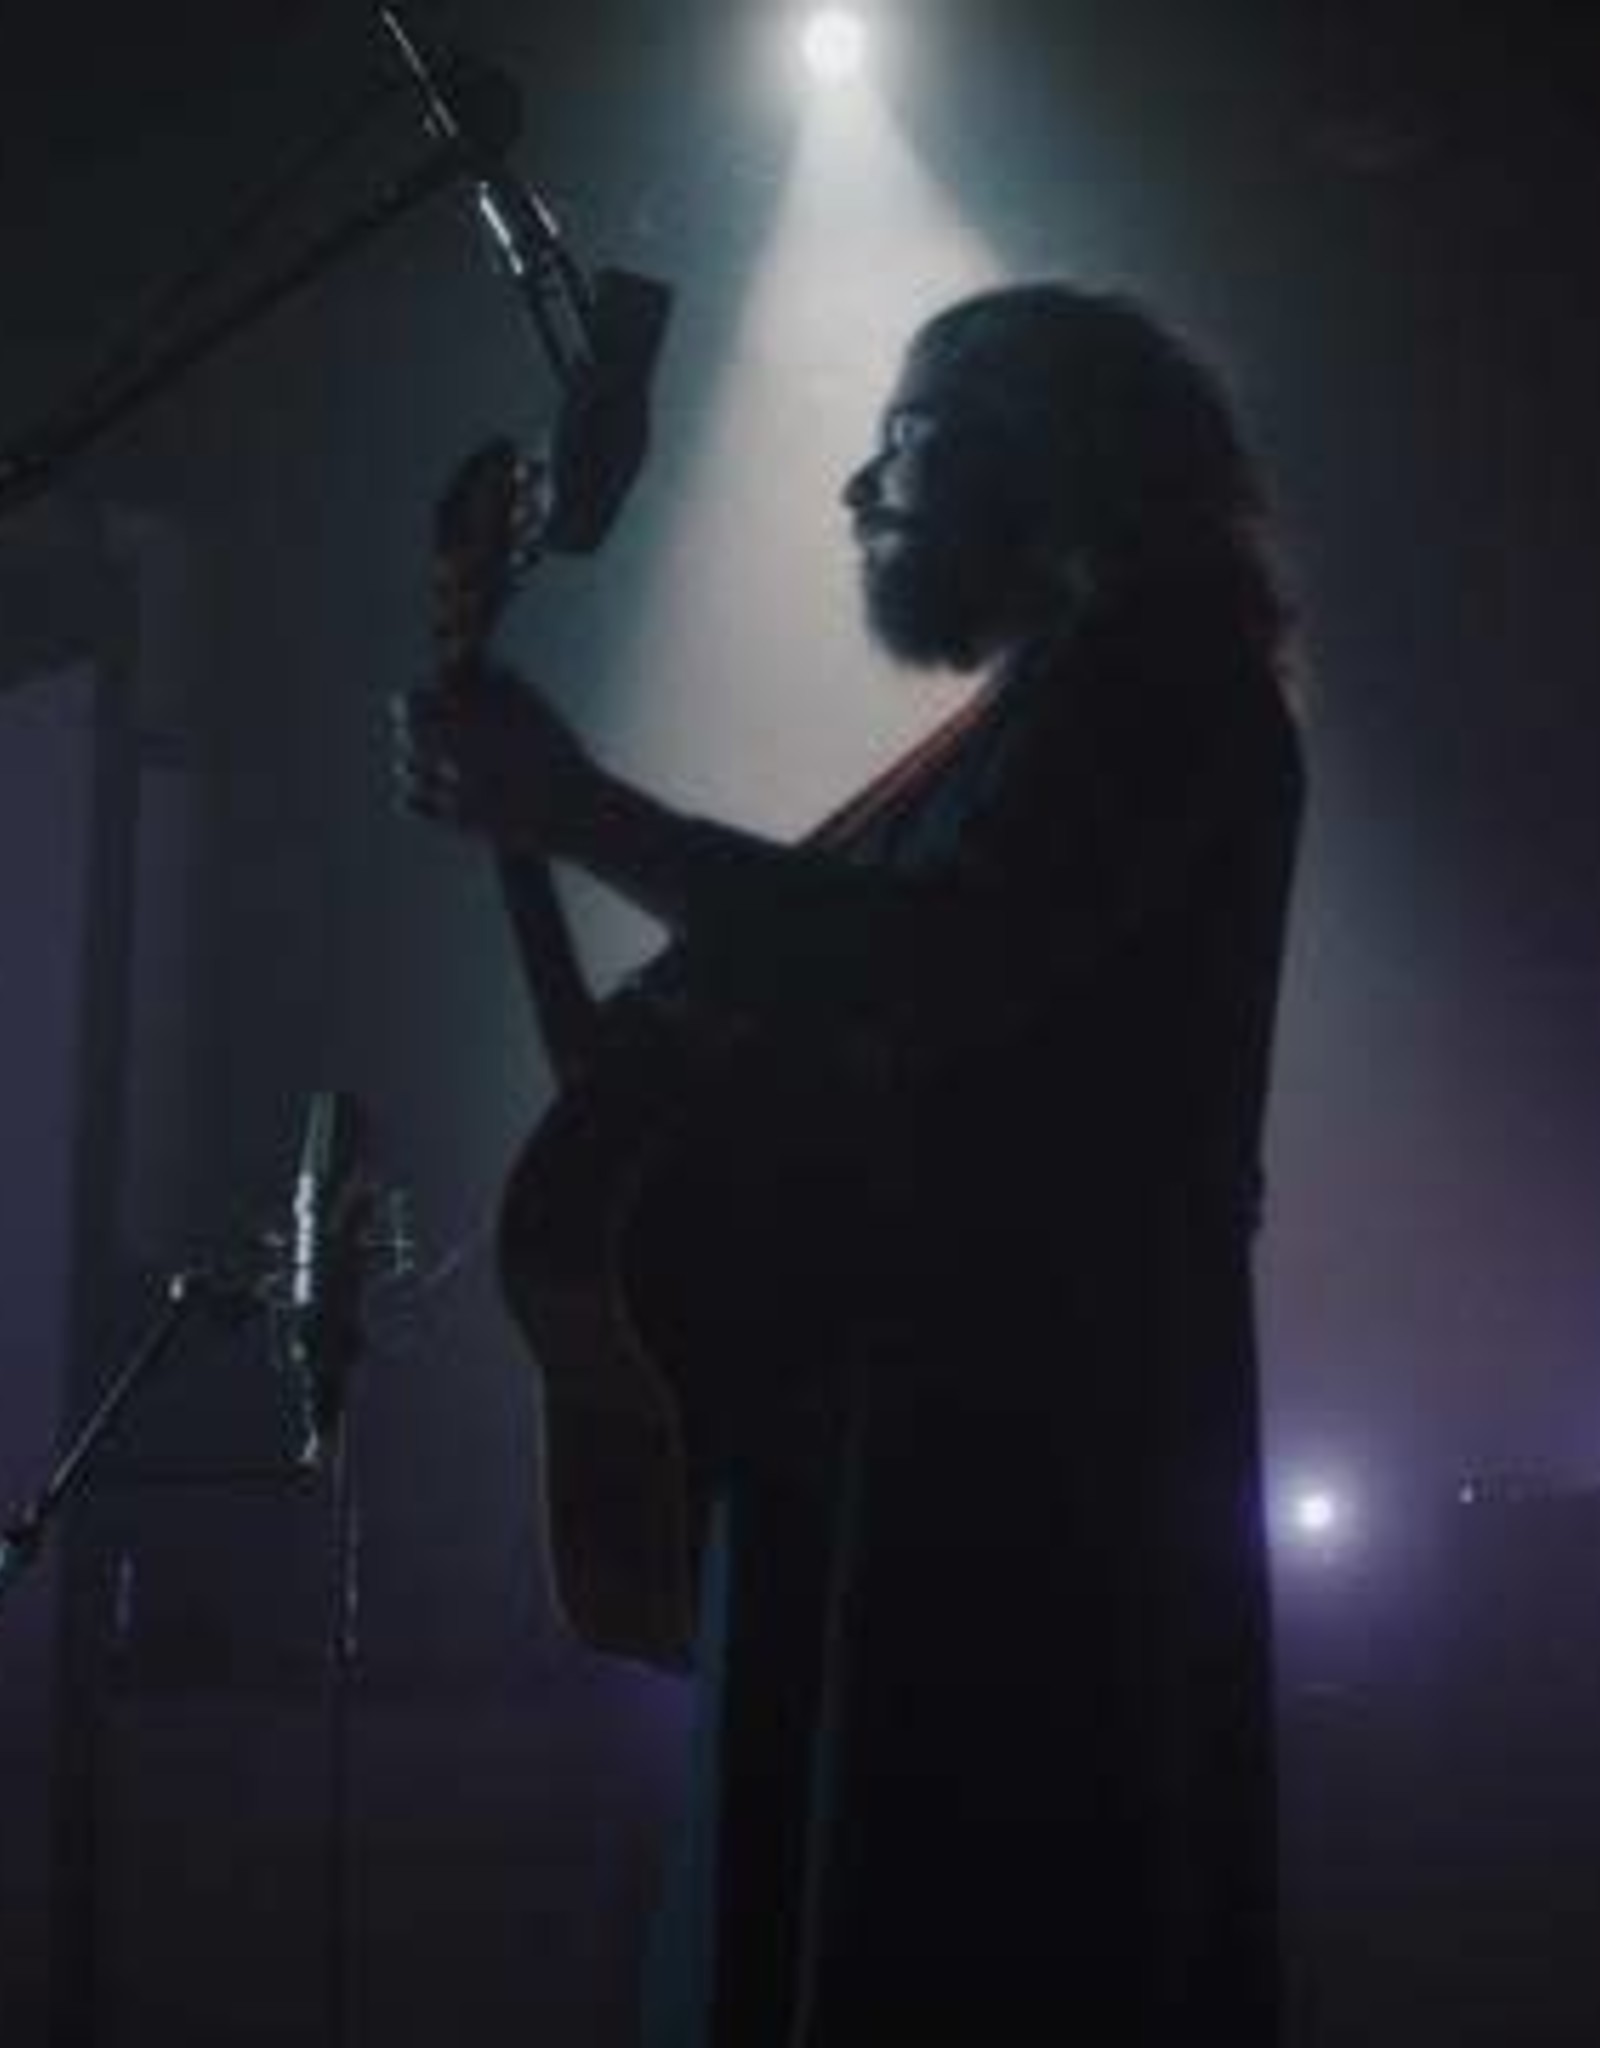 My Morning Jacket - Live From RCA Studio A (Jim James Acoustic)(RSD 6/22)